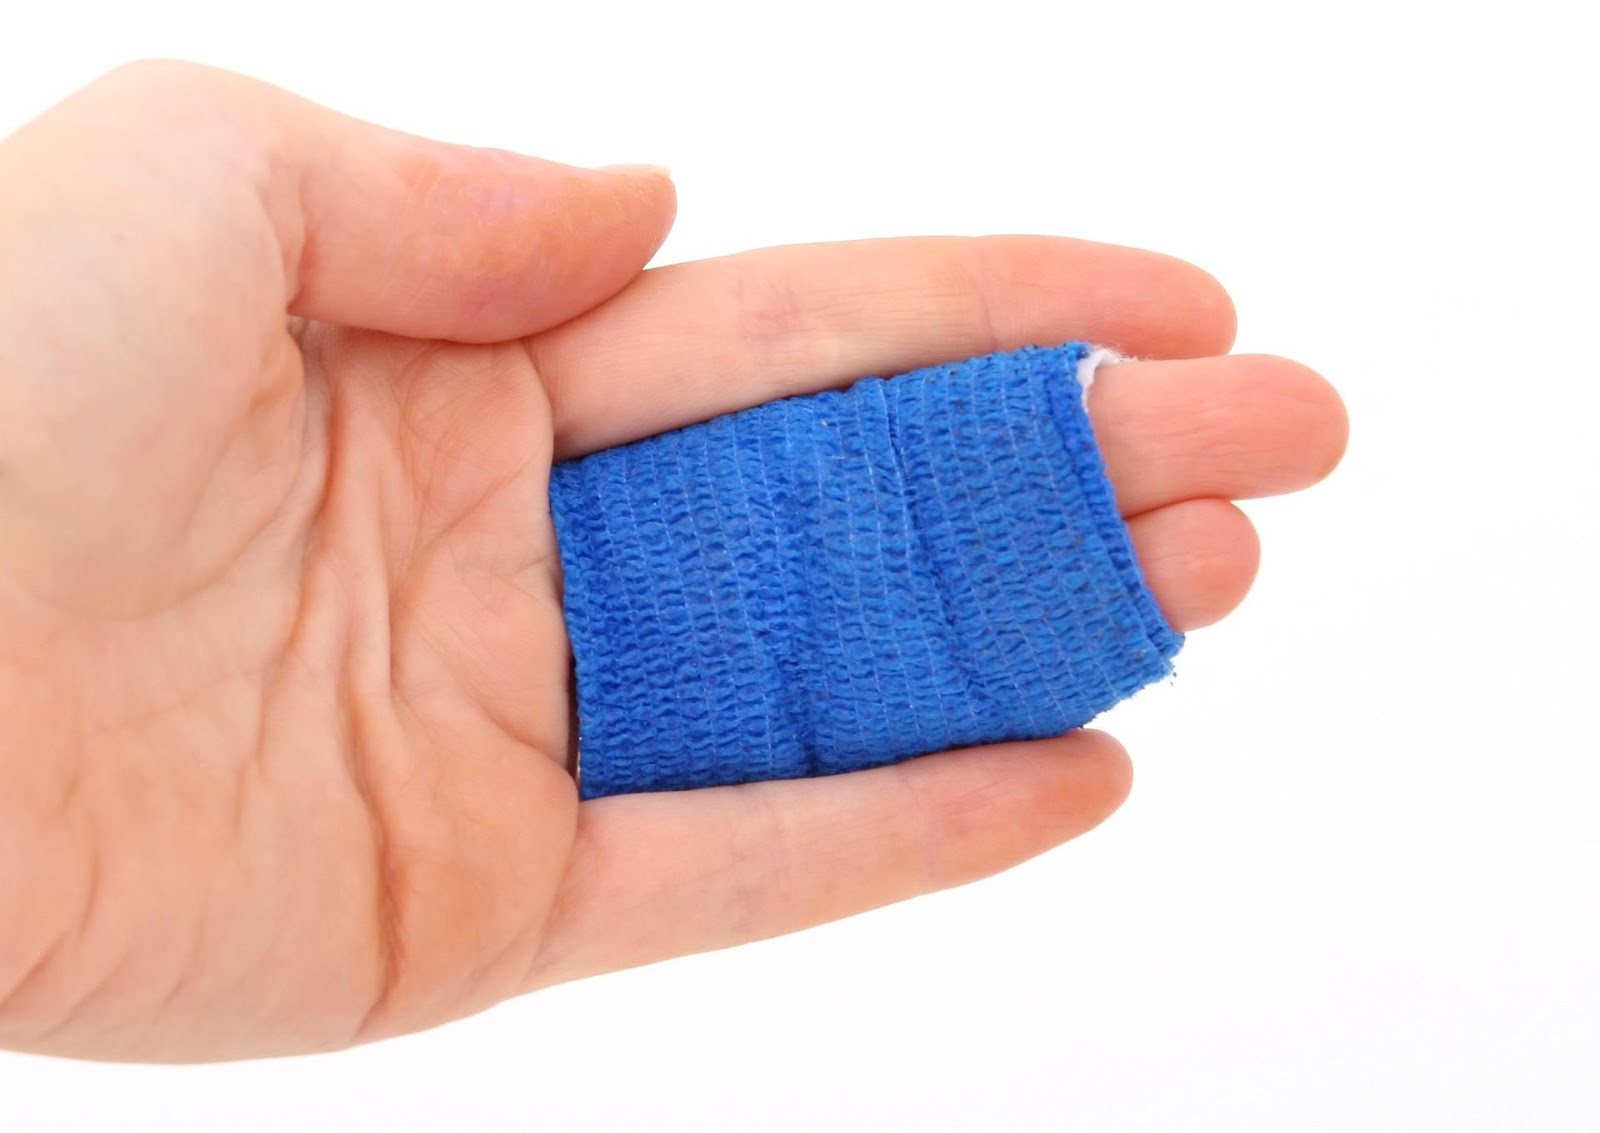 11 Best Tips to Make Bone Fractures Heal Faster